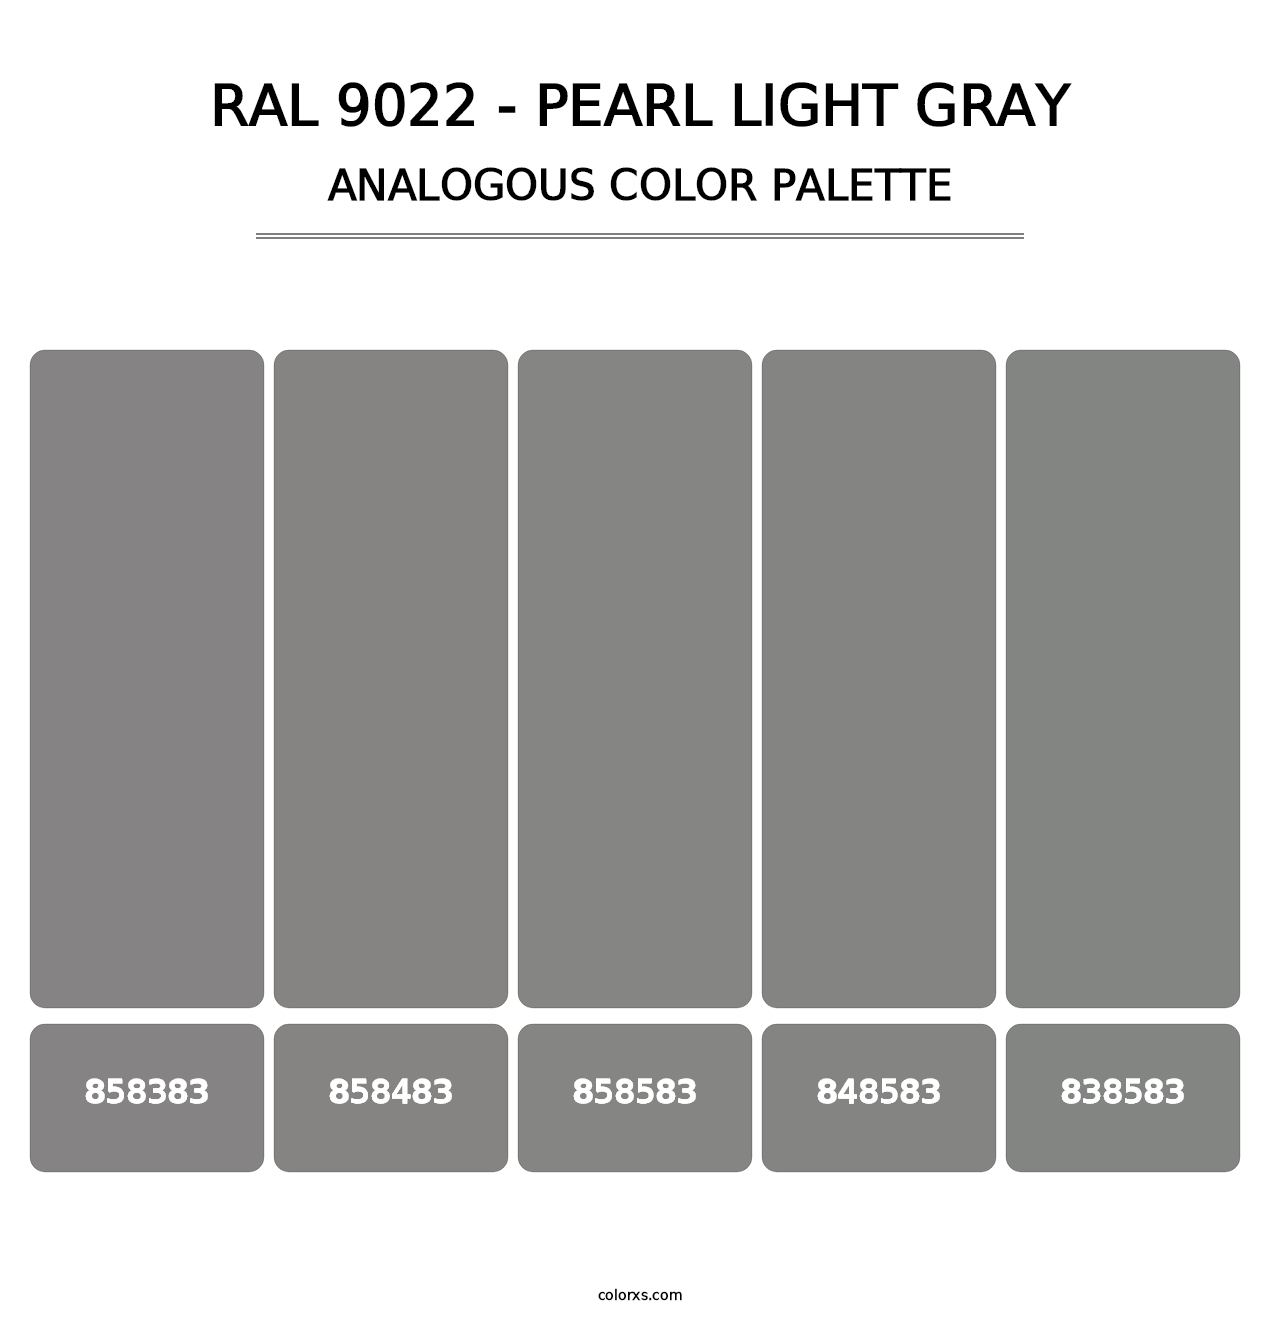 RAL 9022 - Pearl Light Gray - Analogous Color Palette